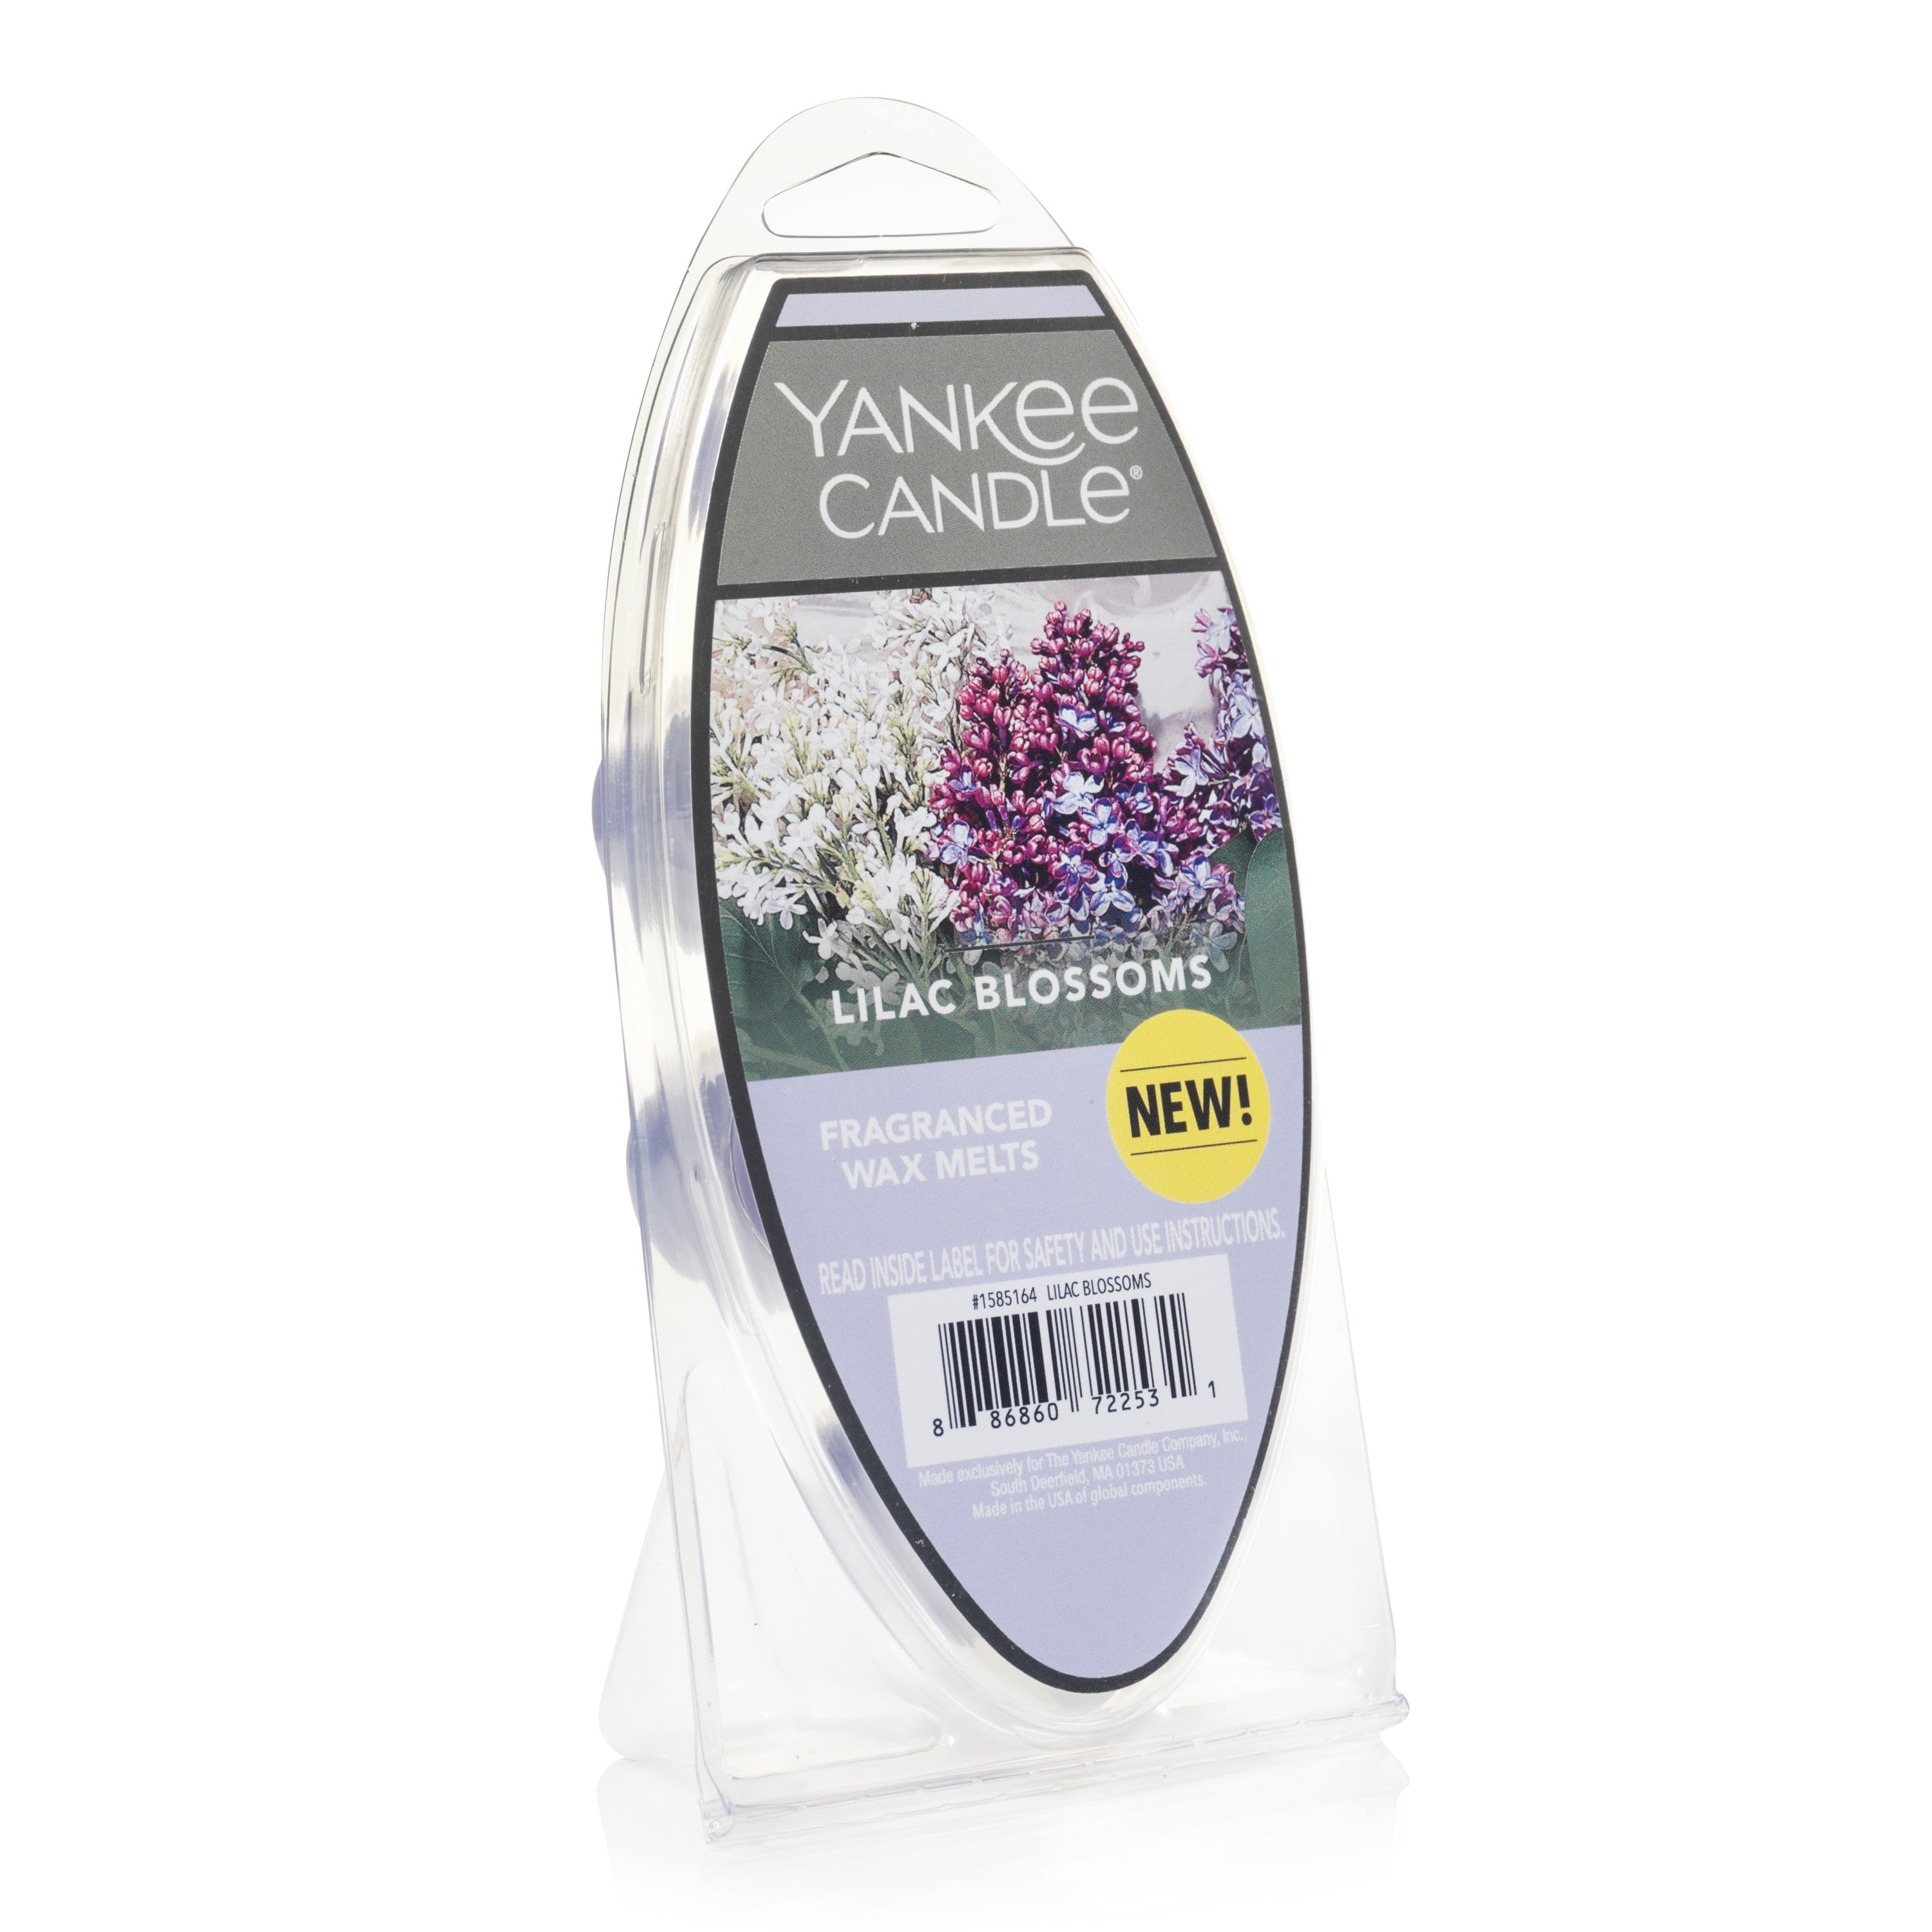 Yankee Candle Wax Melts, Lilac Blossoms - 6 candles, 2.6 oz